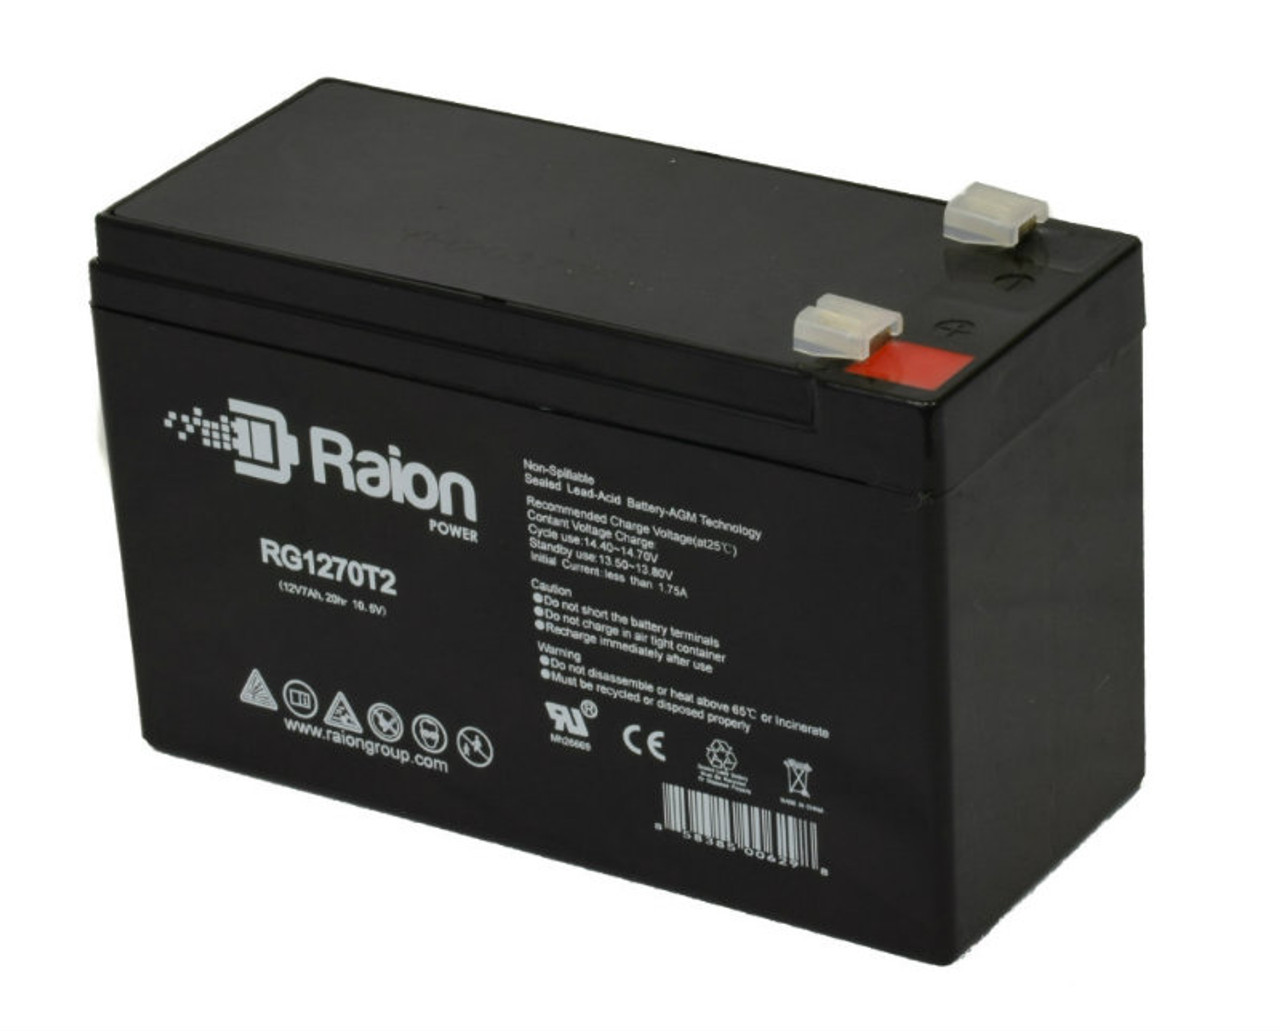 Raion Power RG1270T1 12V 7Ah Non-Spillable Replacement Battery for Alexander GB1245